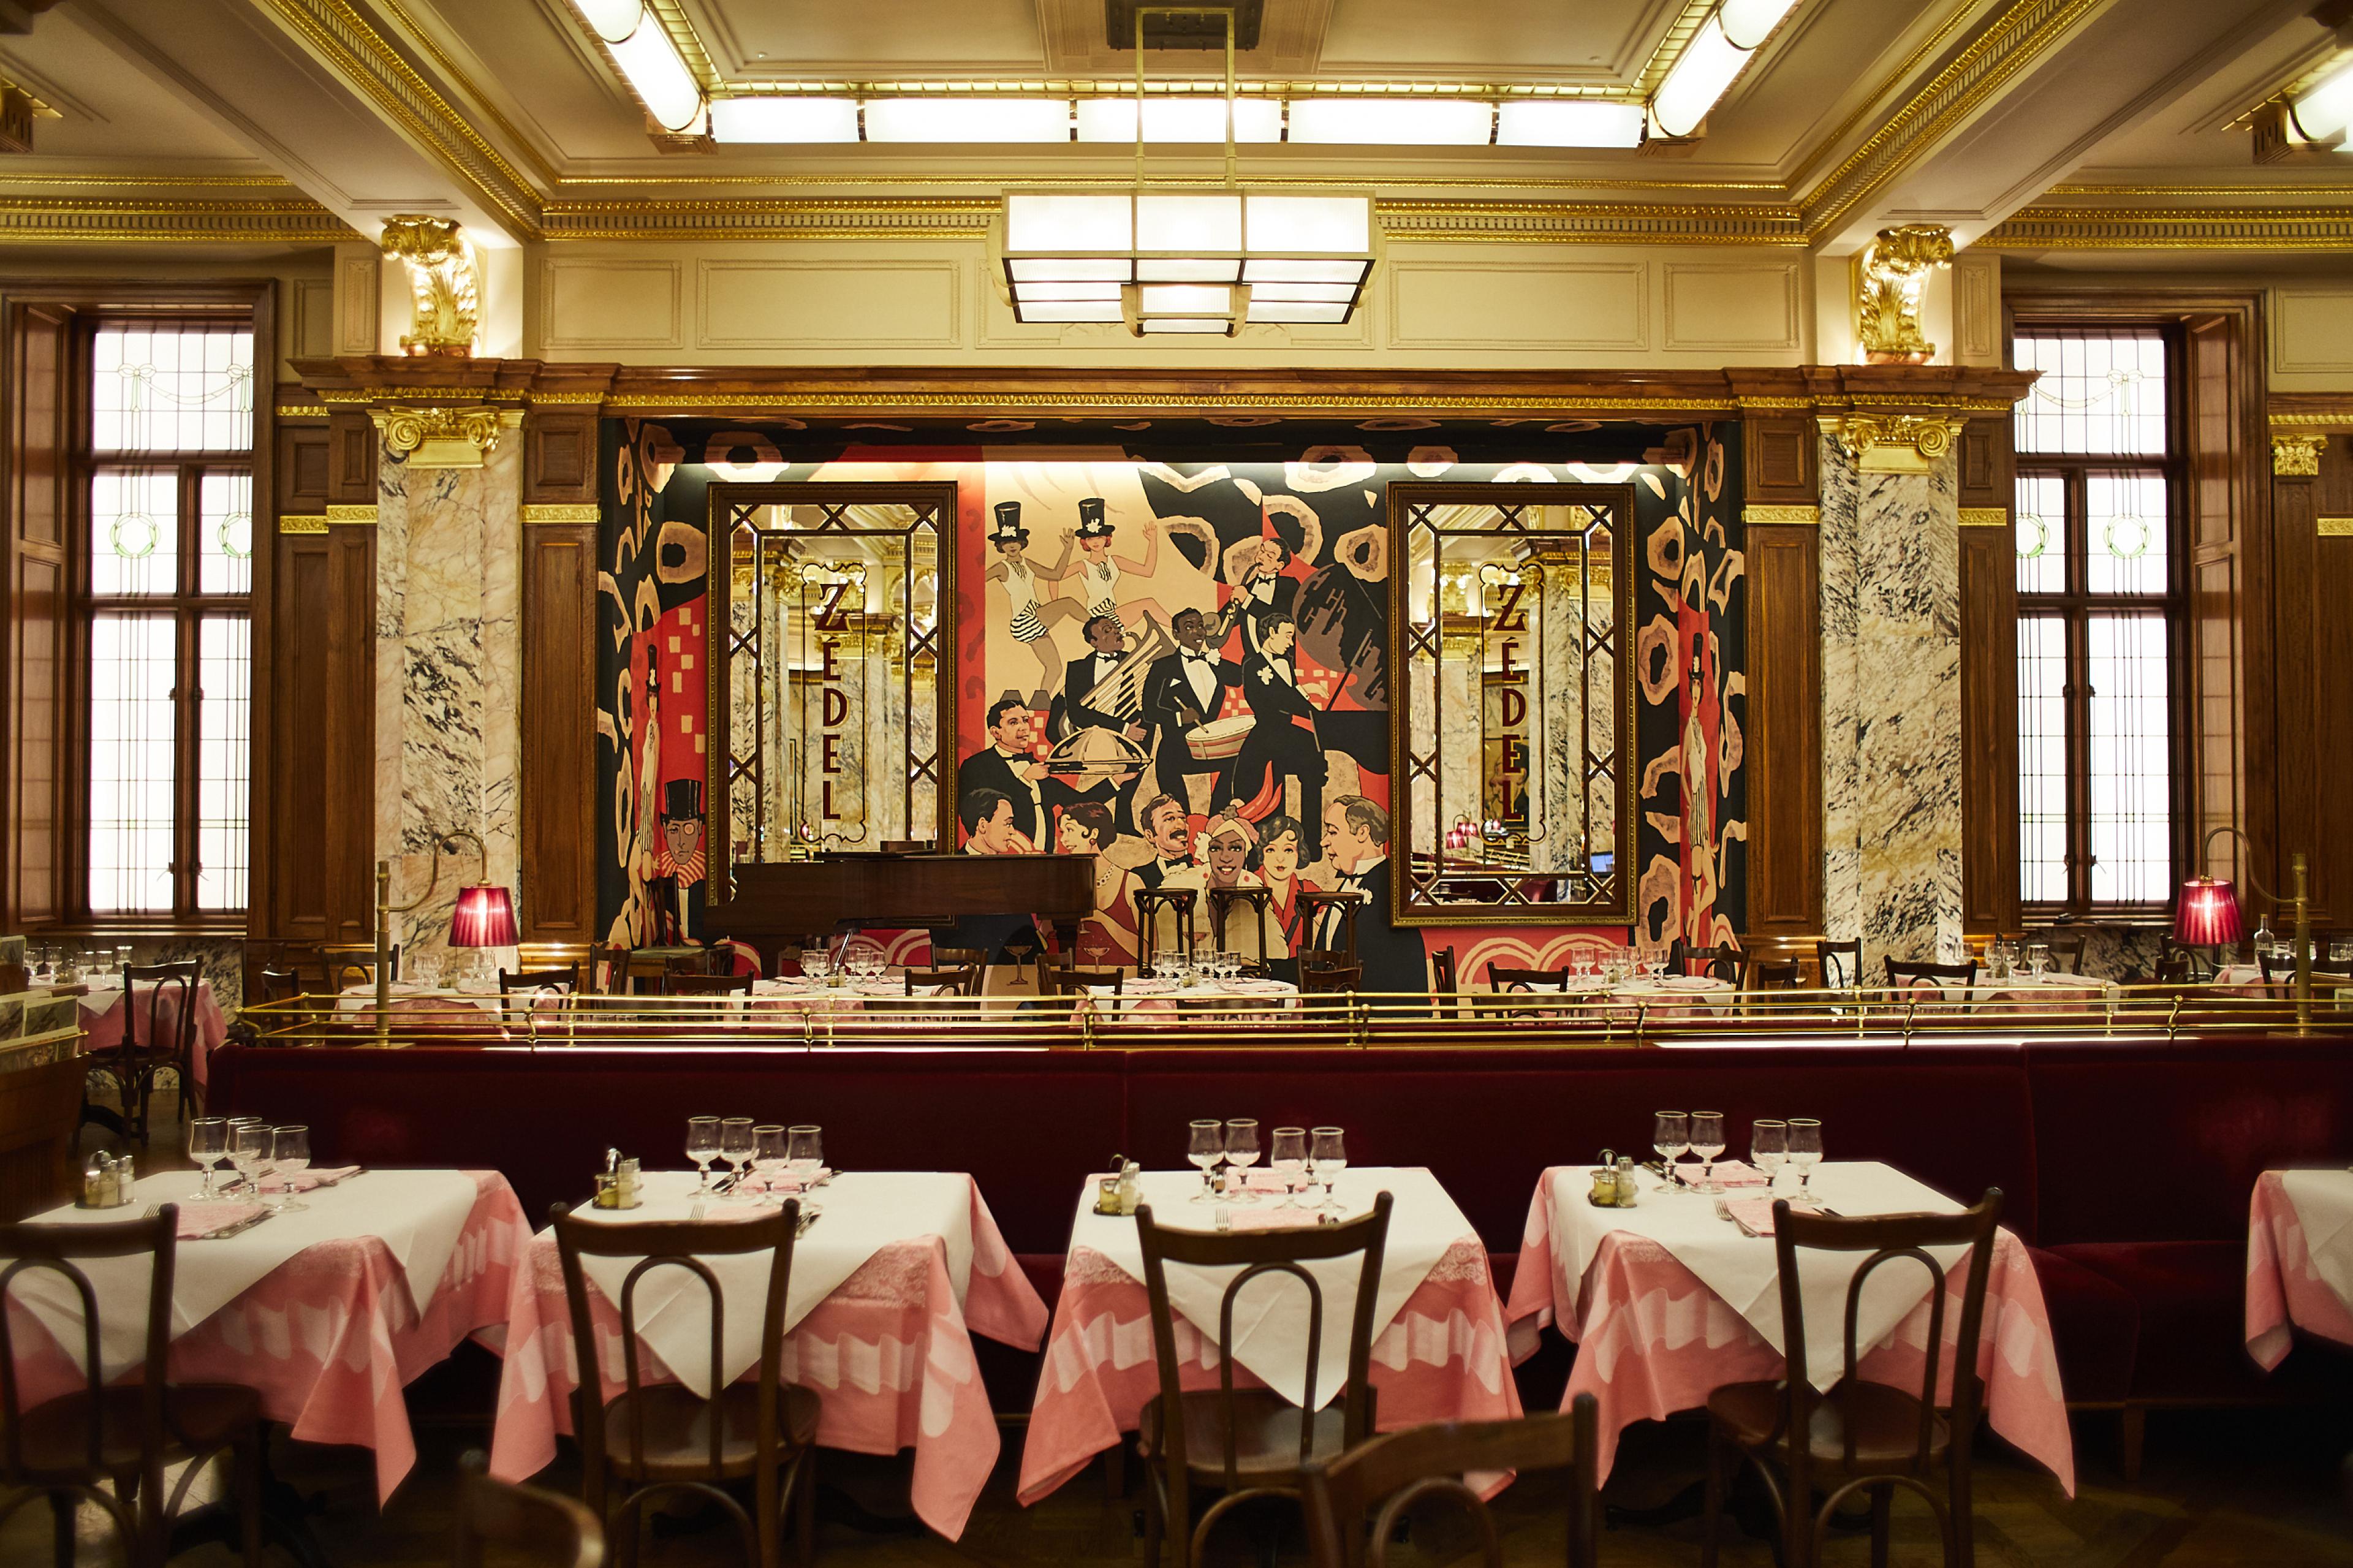 brasserie with pink tableclothes and a colorful mural behind the bar